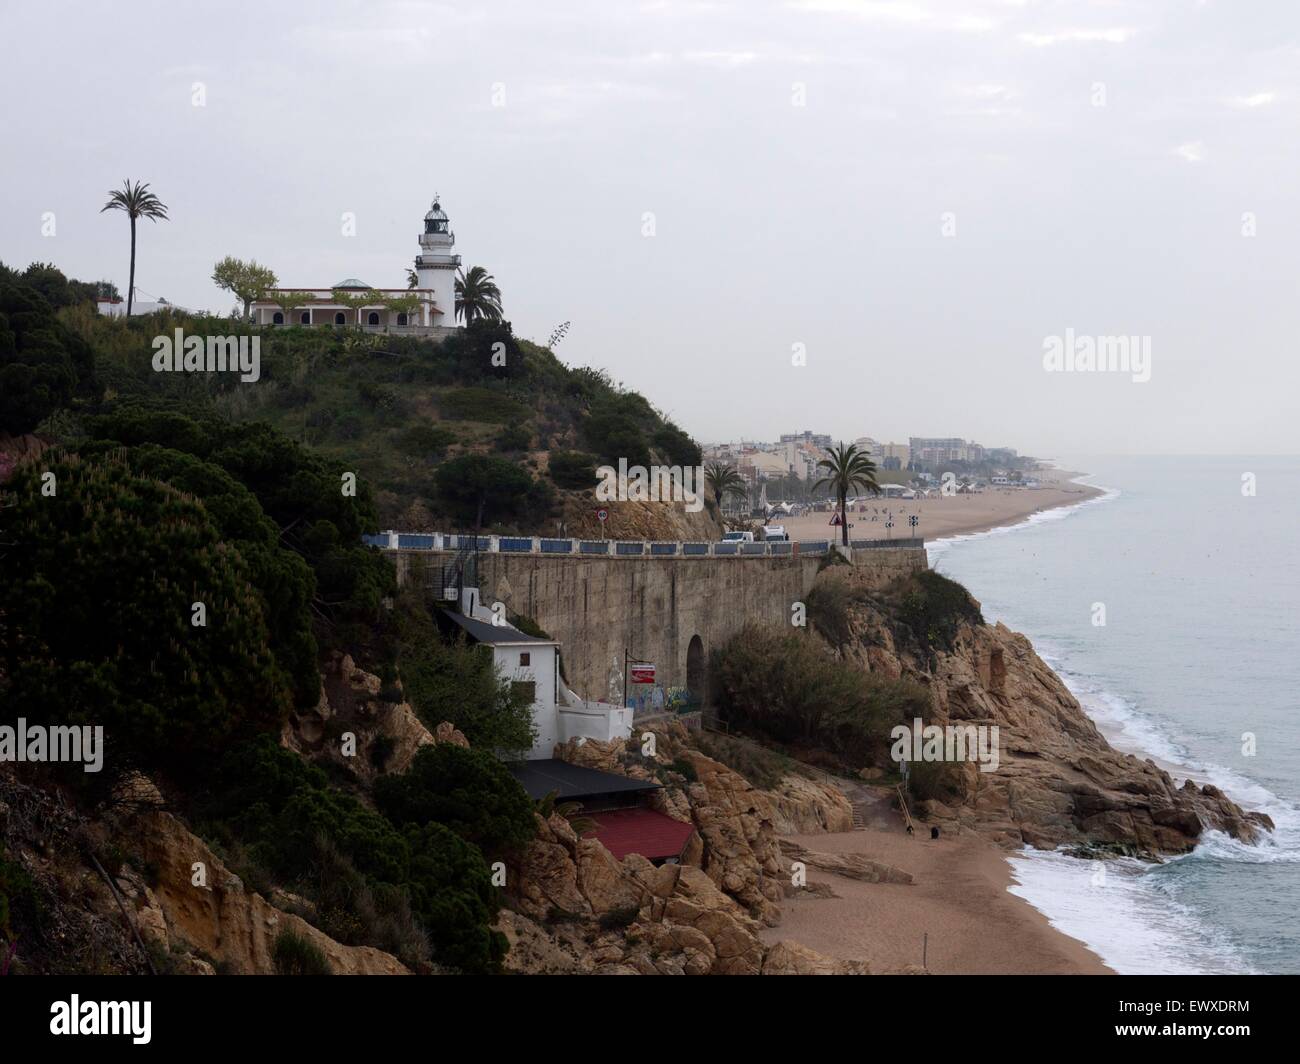 Empty beach in Spain on a gloomy looking day with a lighthouse overlooking the cliffs Stock Photo